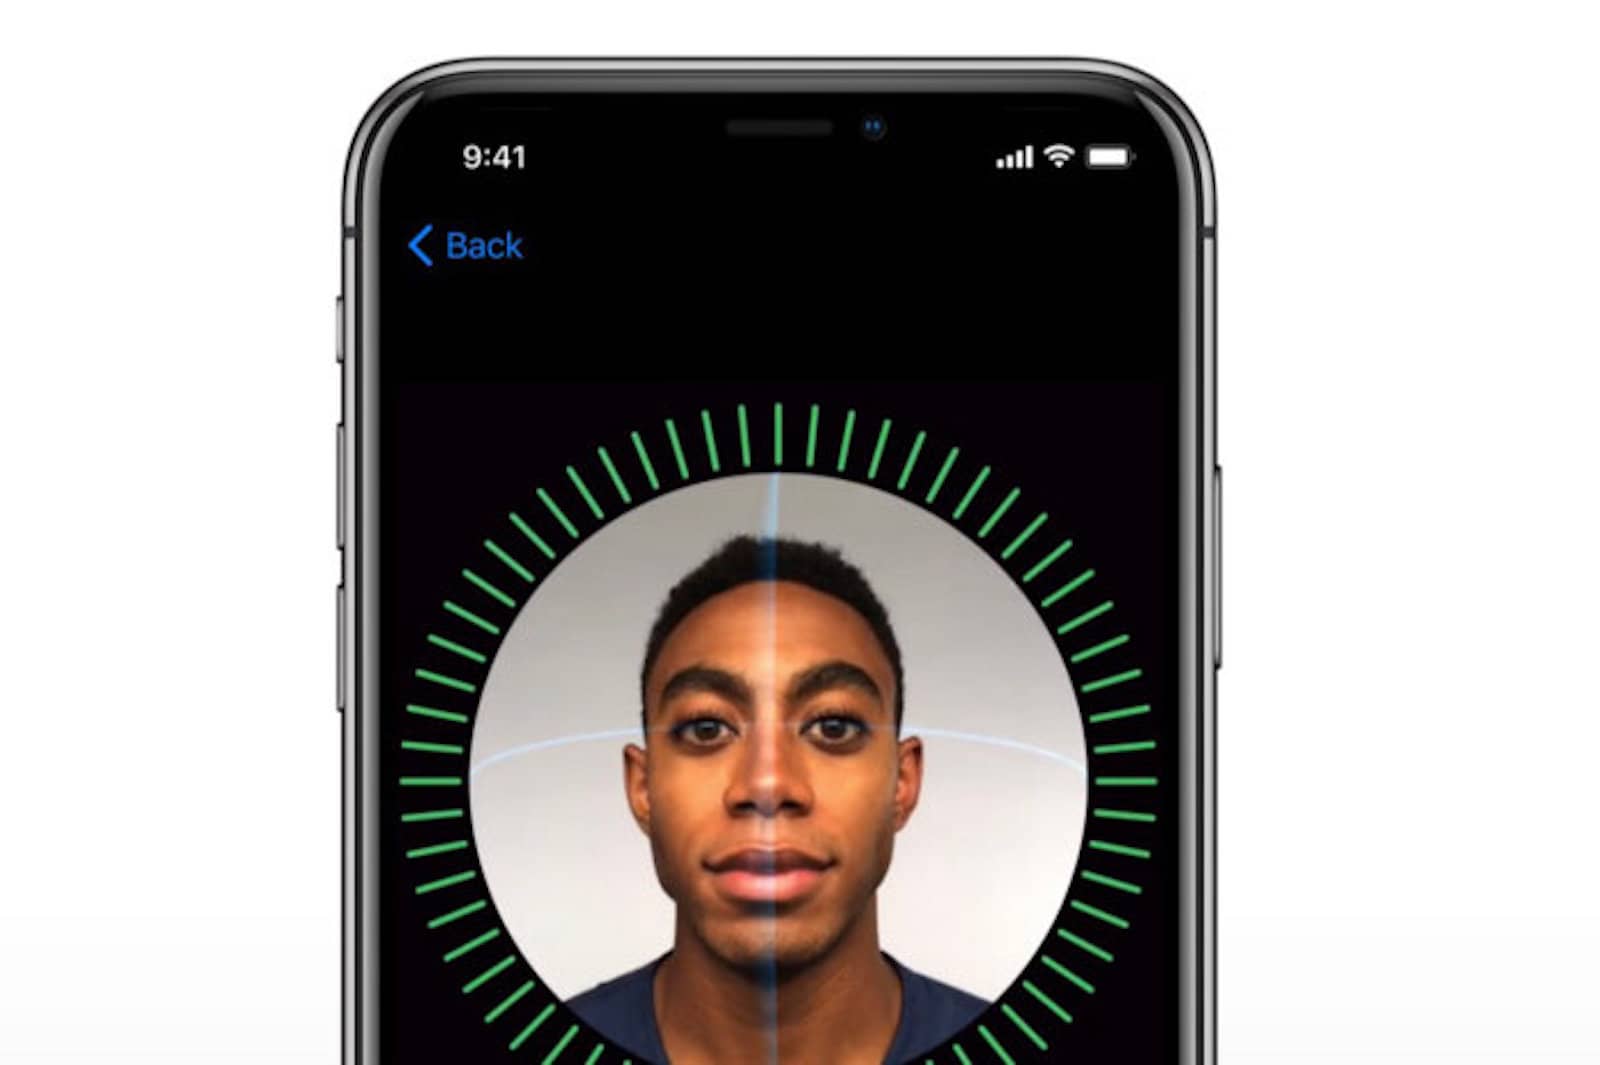 What Face ID security looks like on the iPhone X.